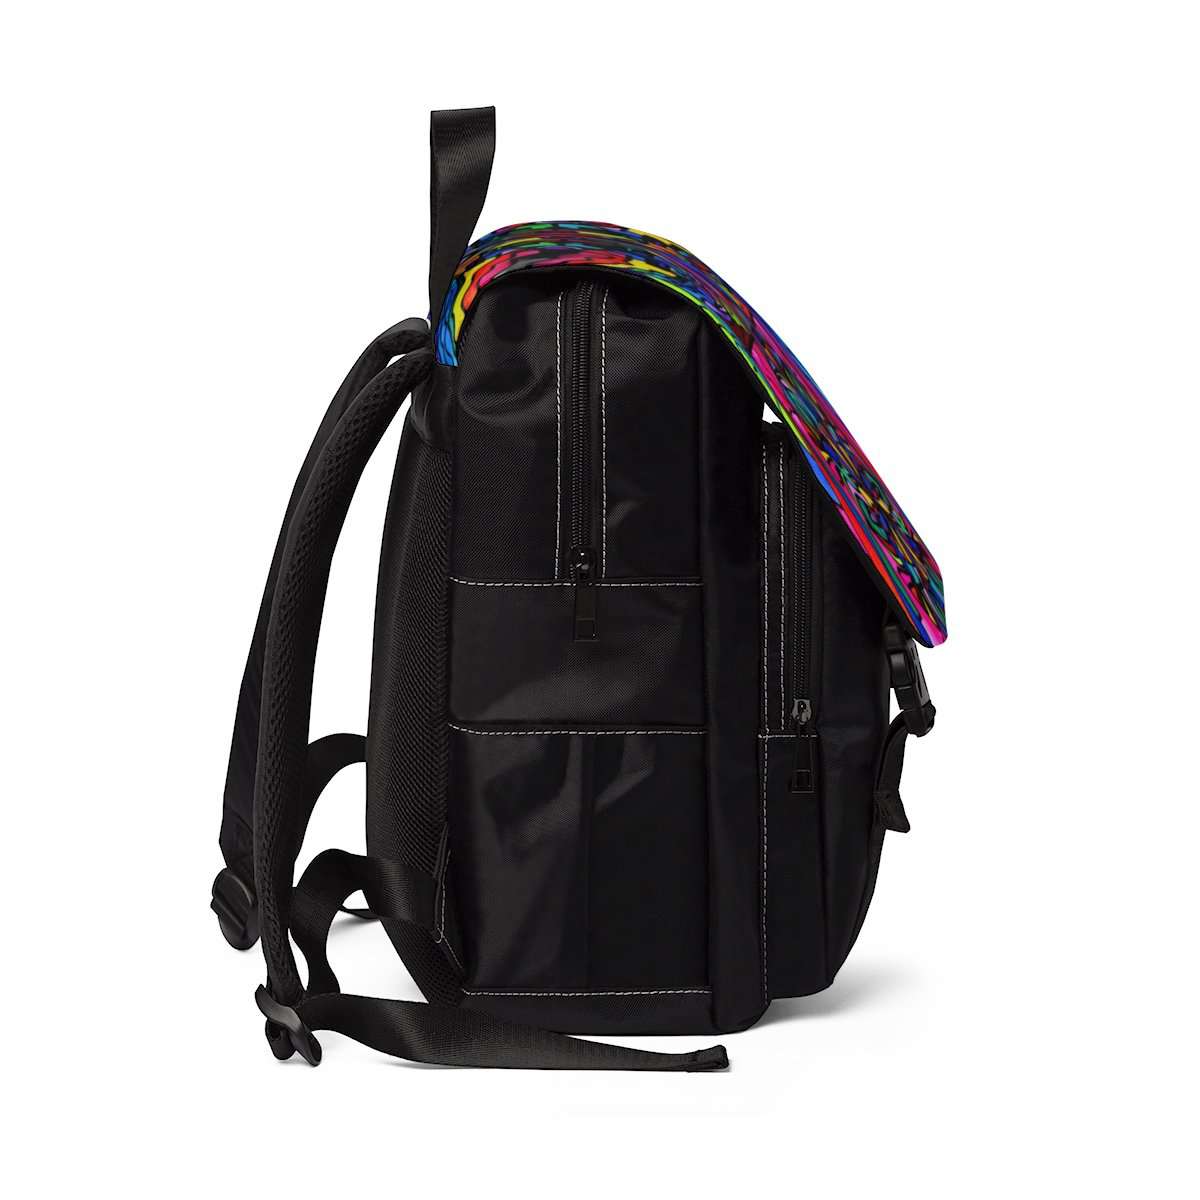 get-your-favorite-non-attachment-unisex-casual-shoulder-backpack-on-sale_1.jpg